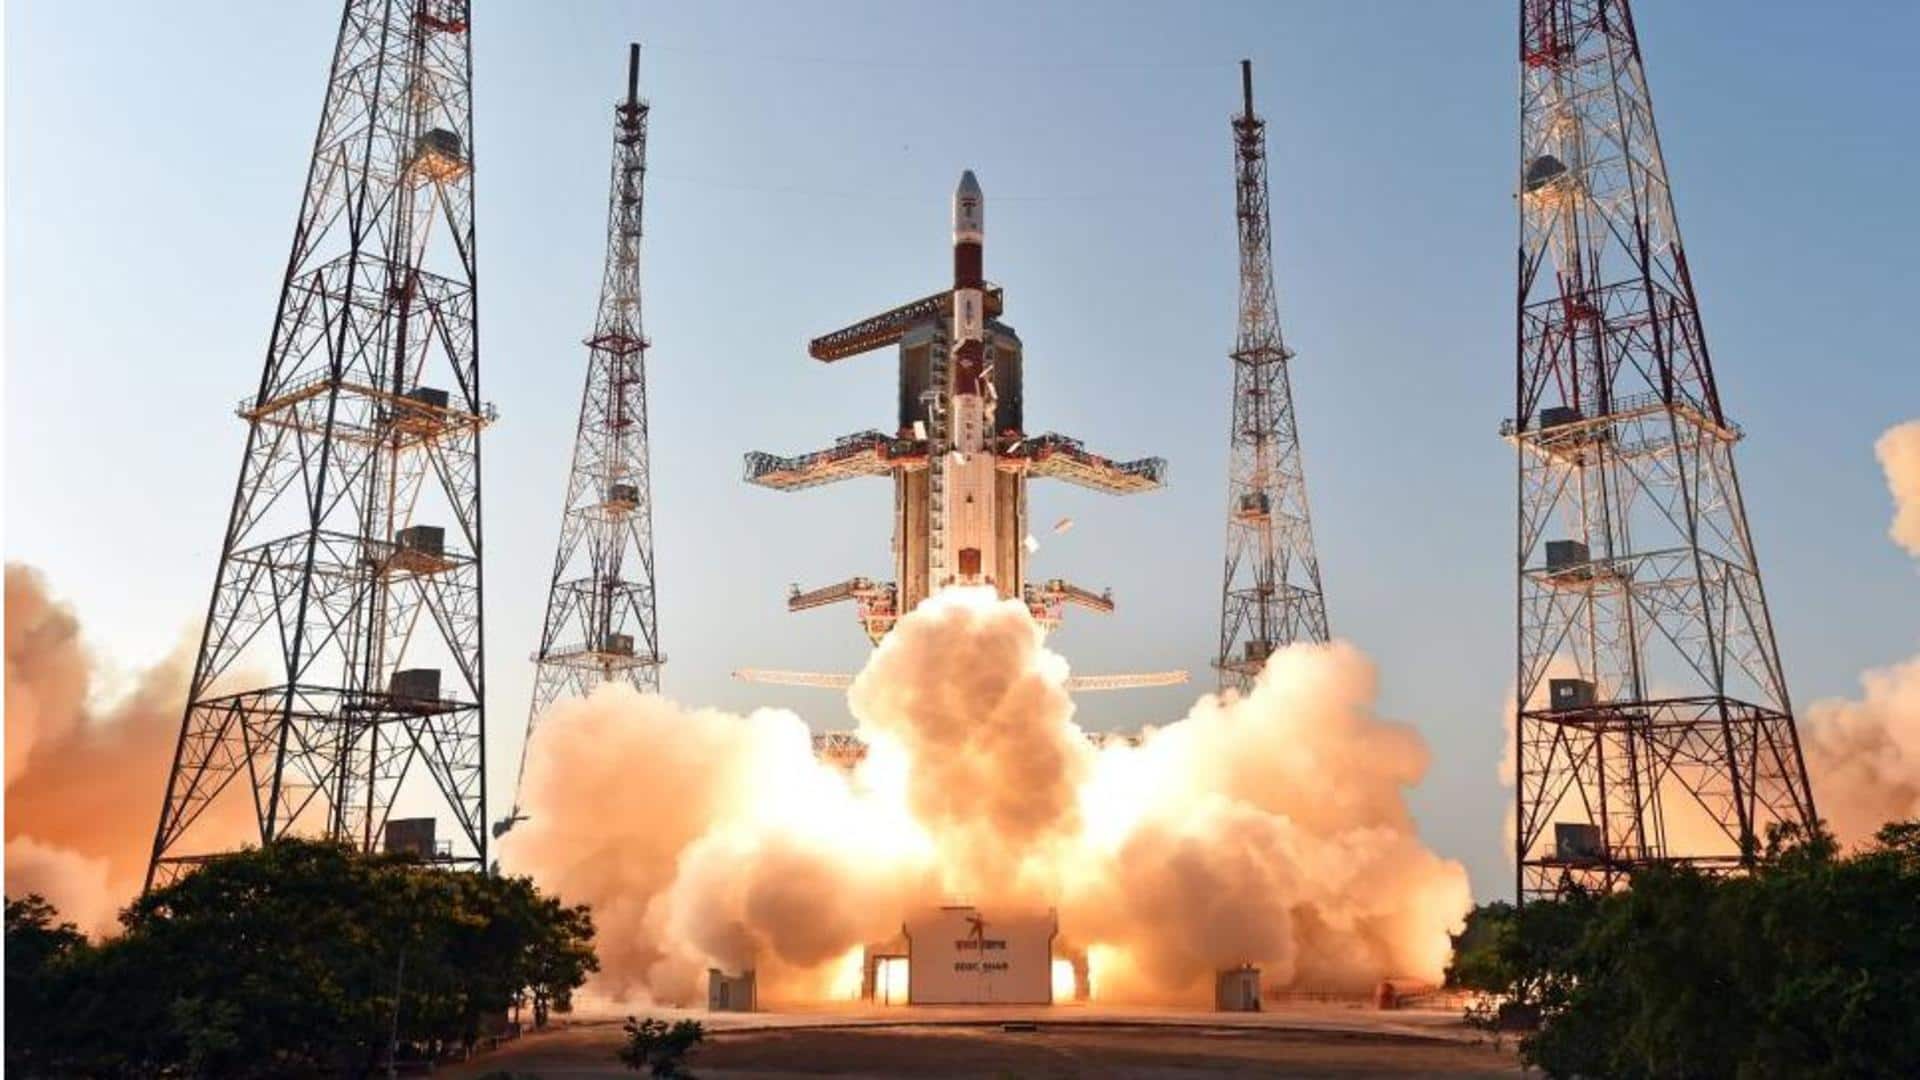 ISRO will take you to space for Rs. 6 crore